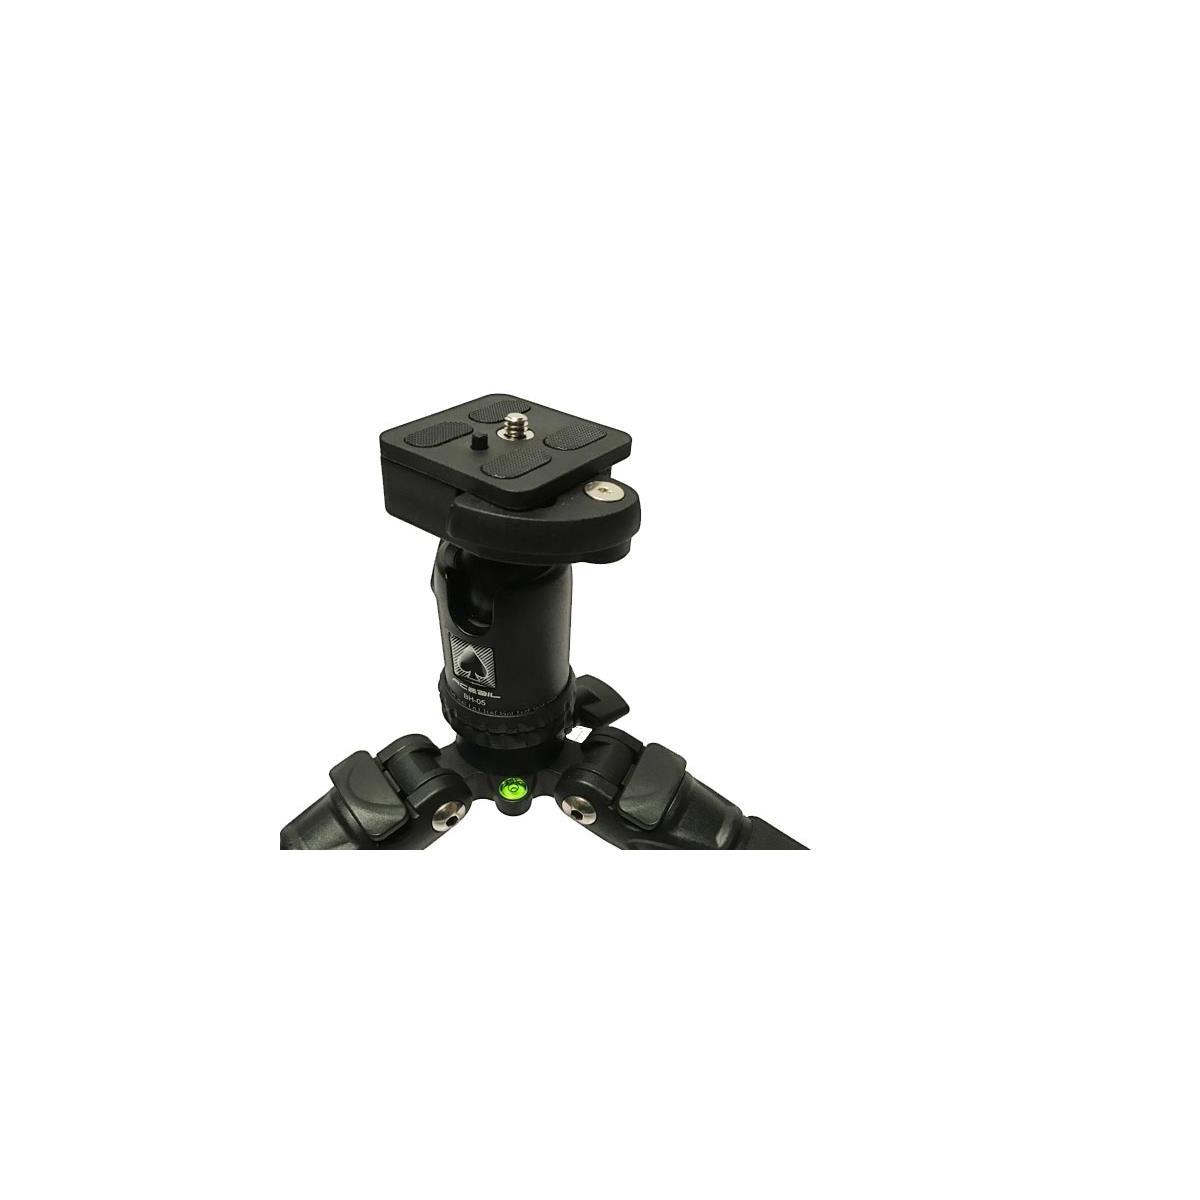 Image of Acebil BH-05 45mm Aluminum Ball Head with Quick Release Plate